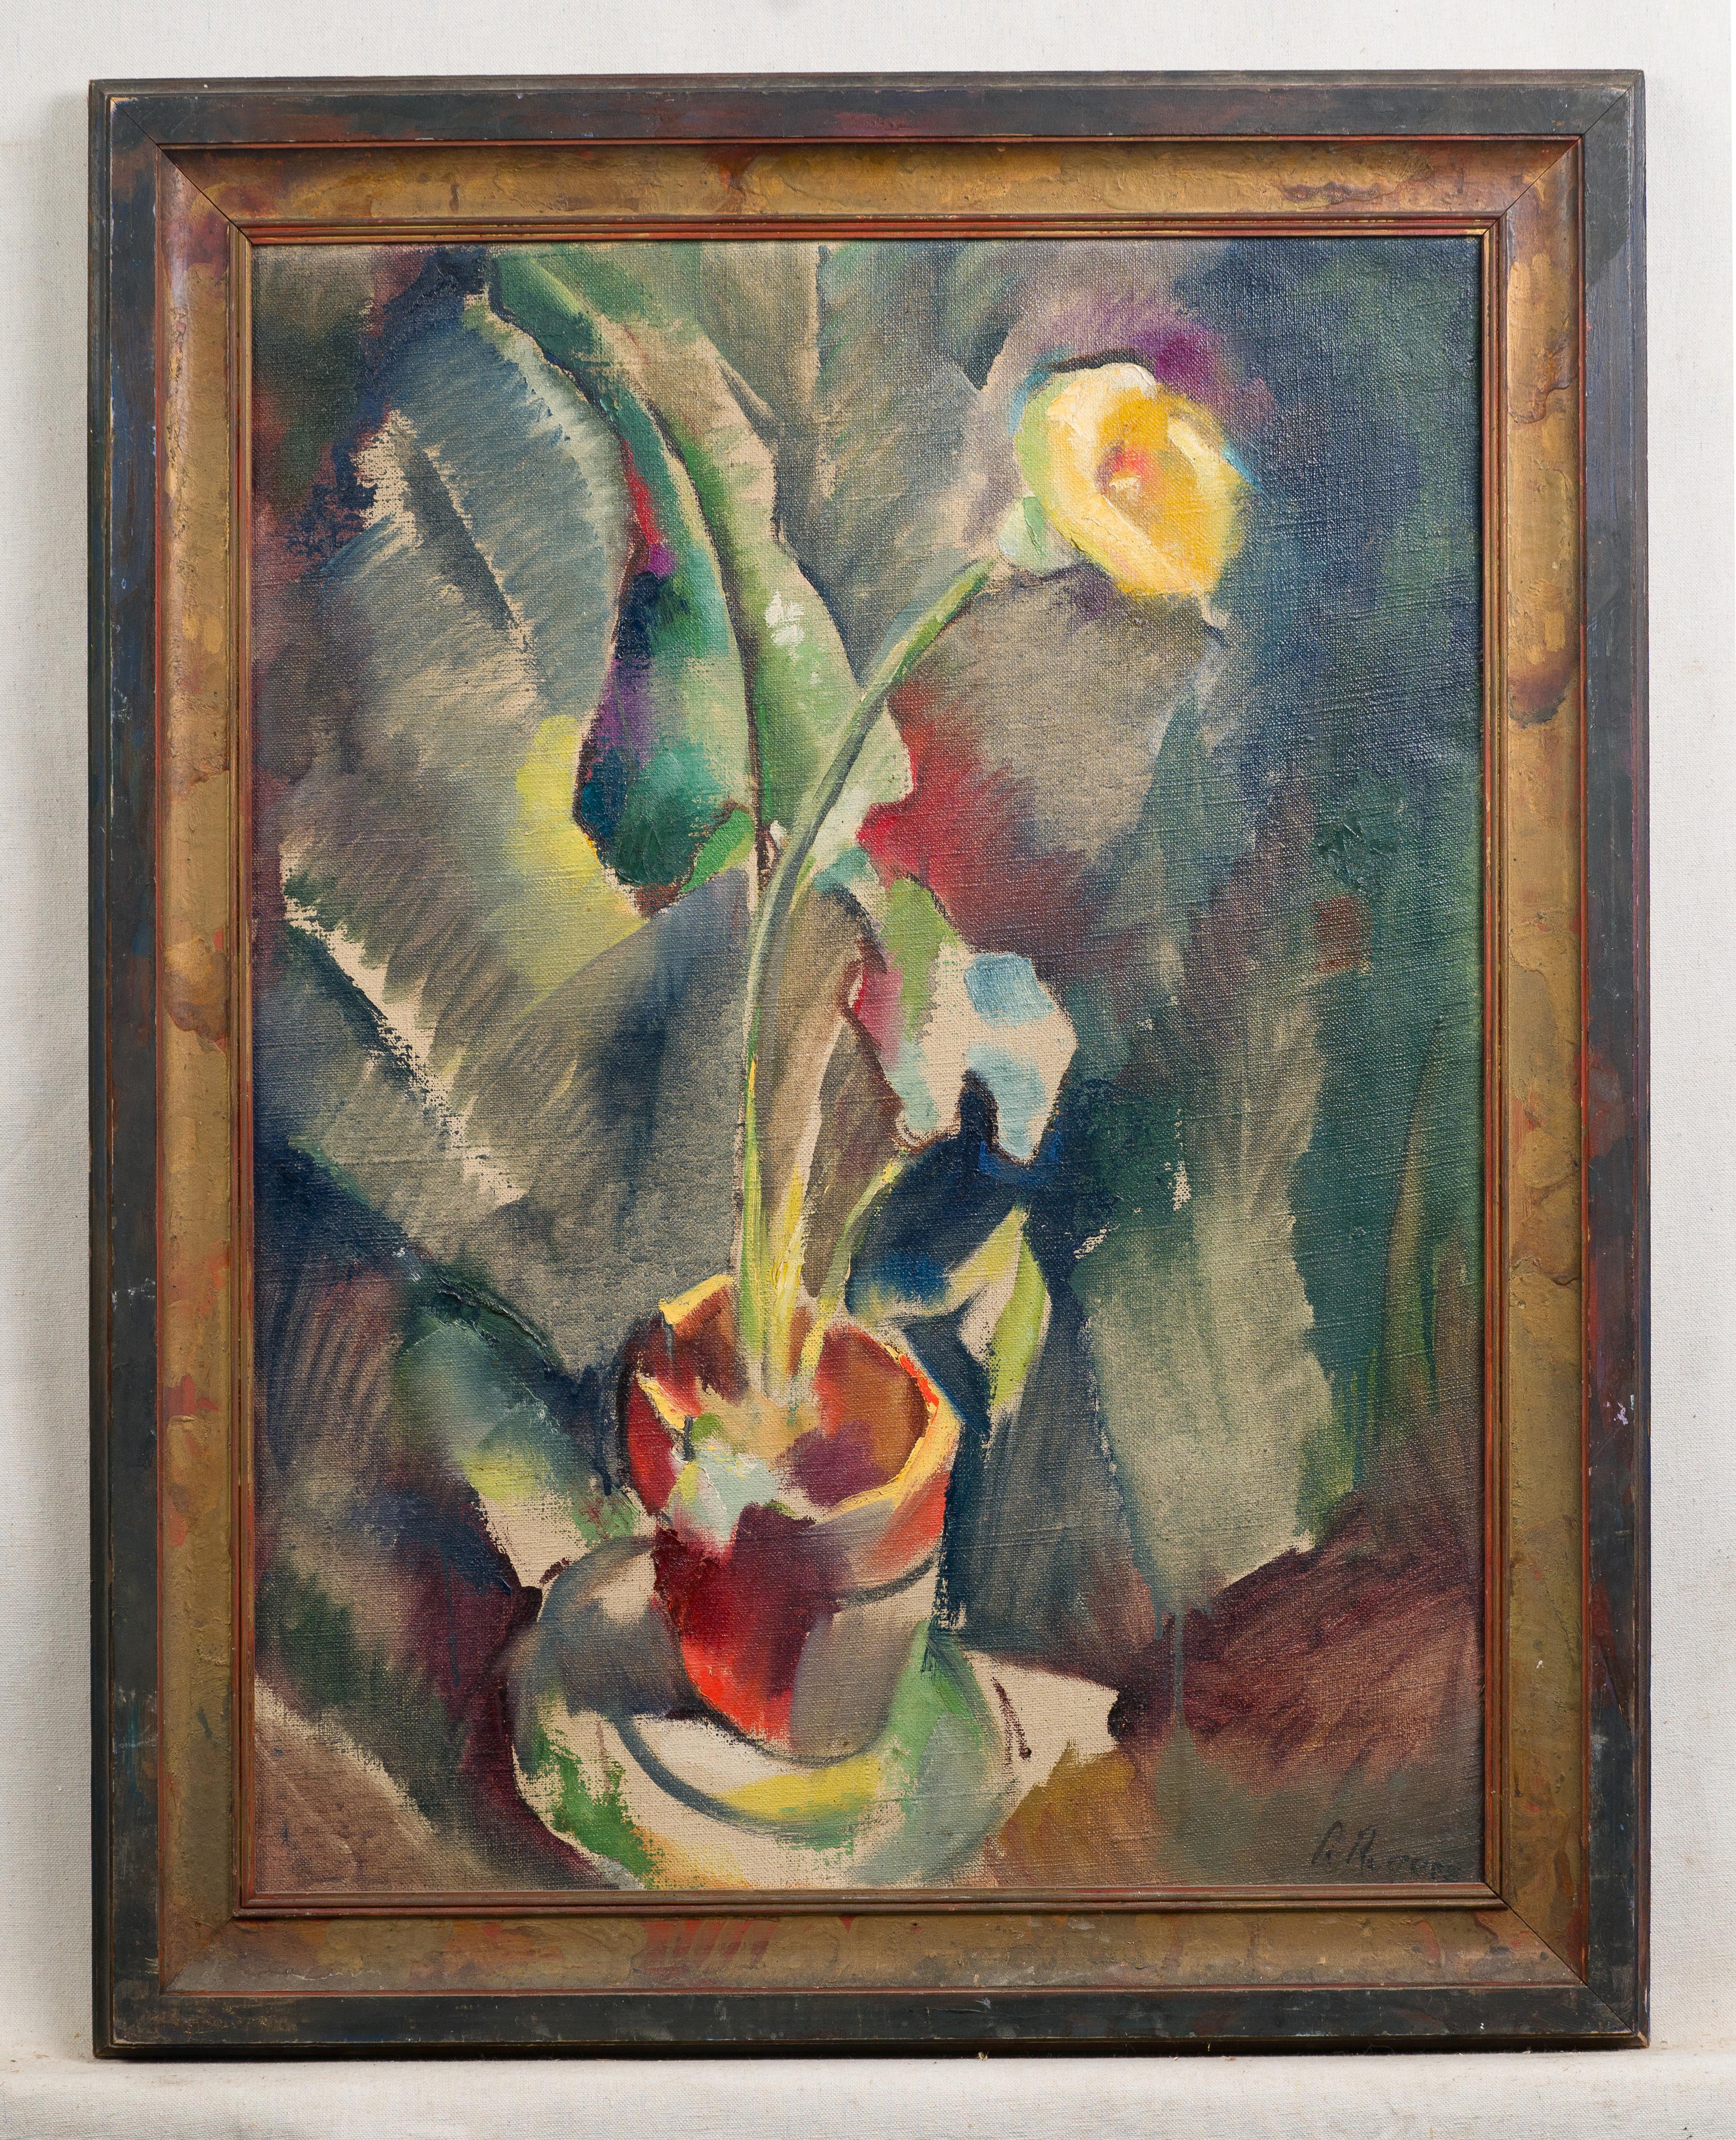 Antique American modernist still life oil painting.  Oil on canvas.  Framed.  Signed. 